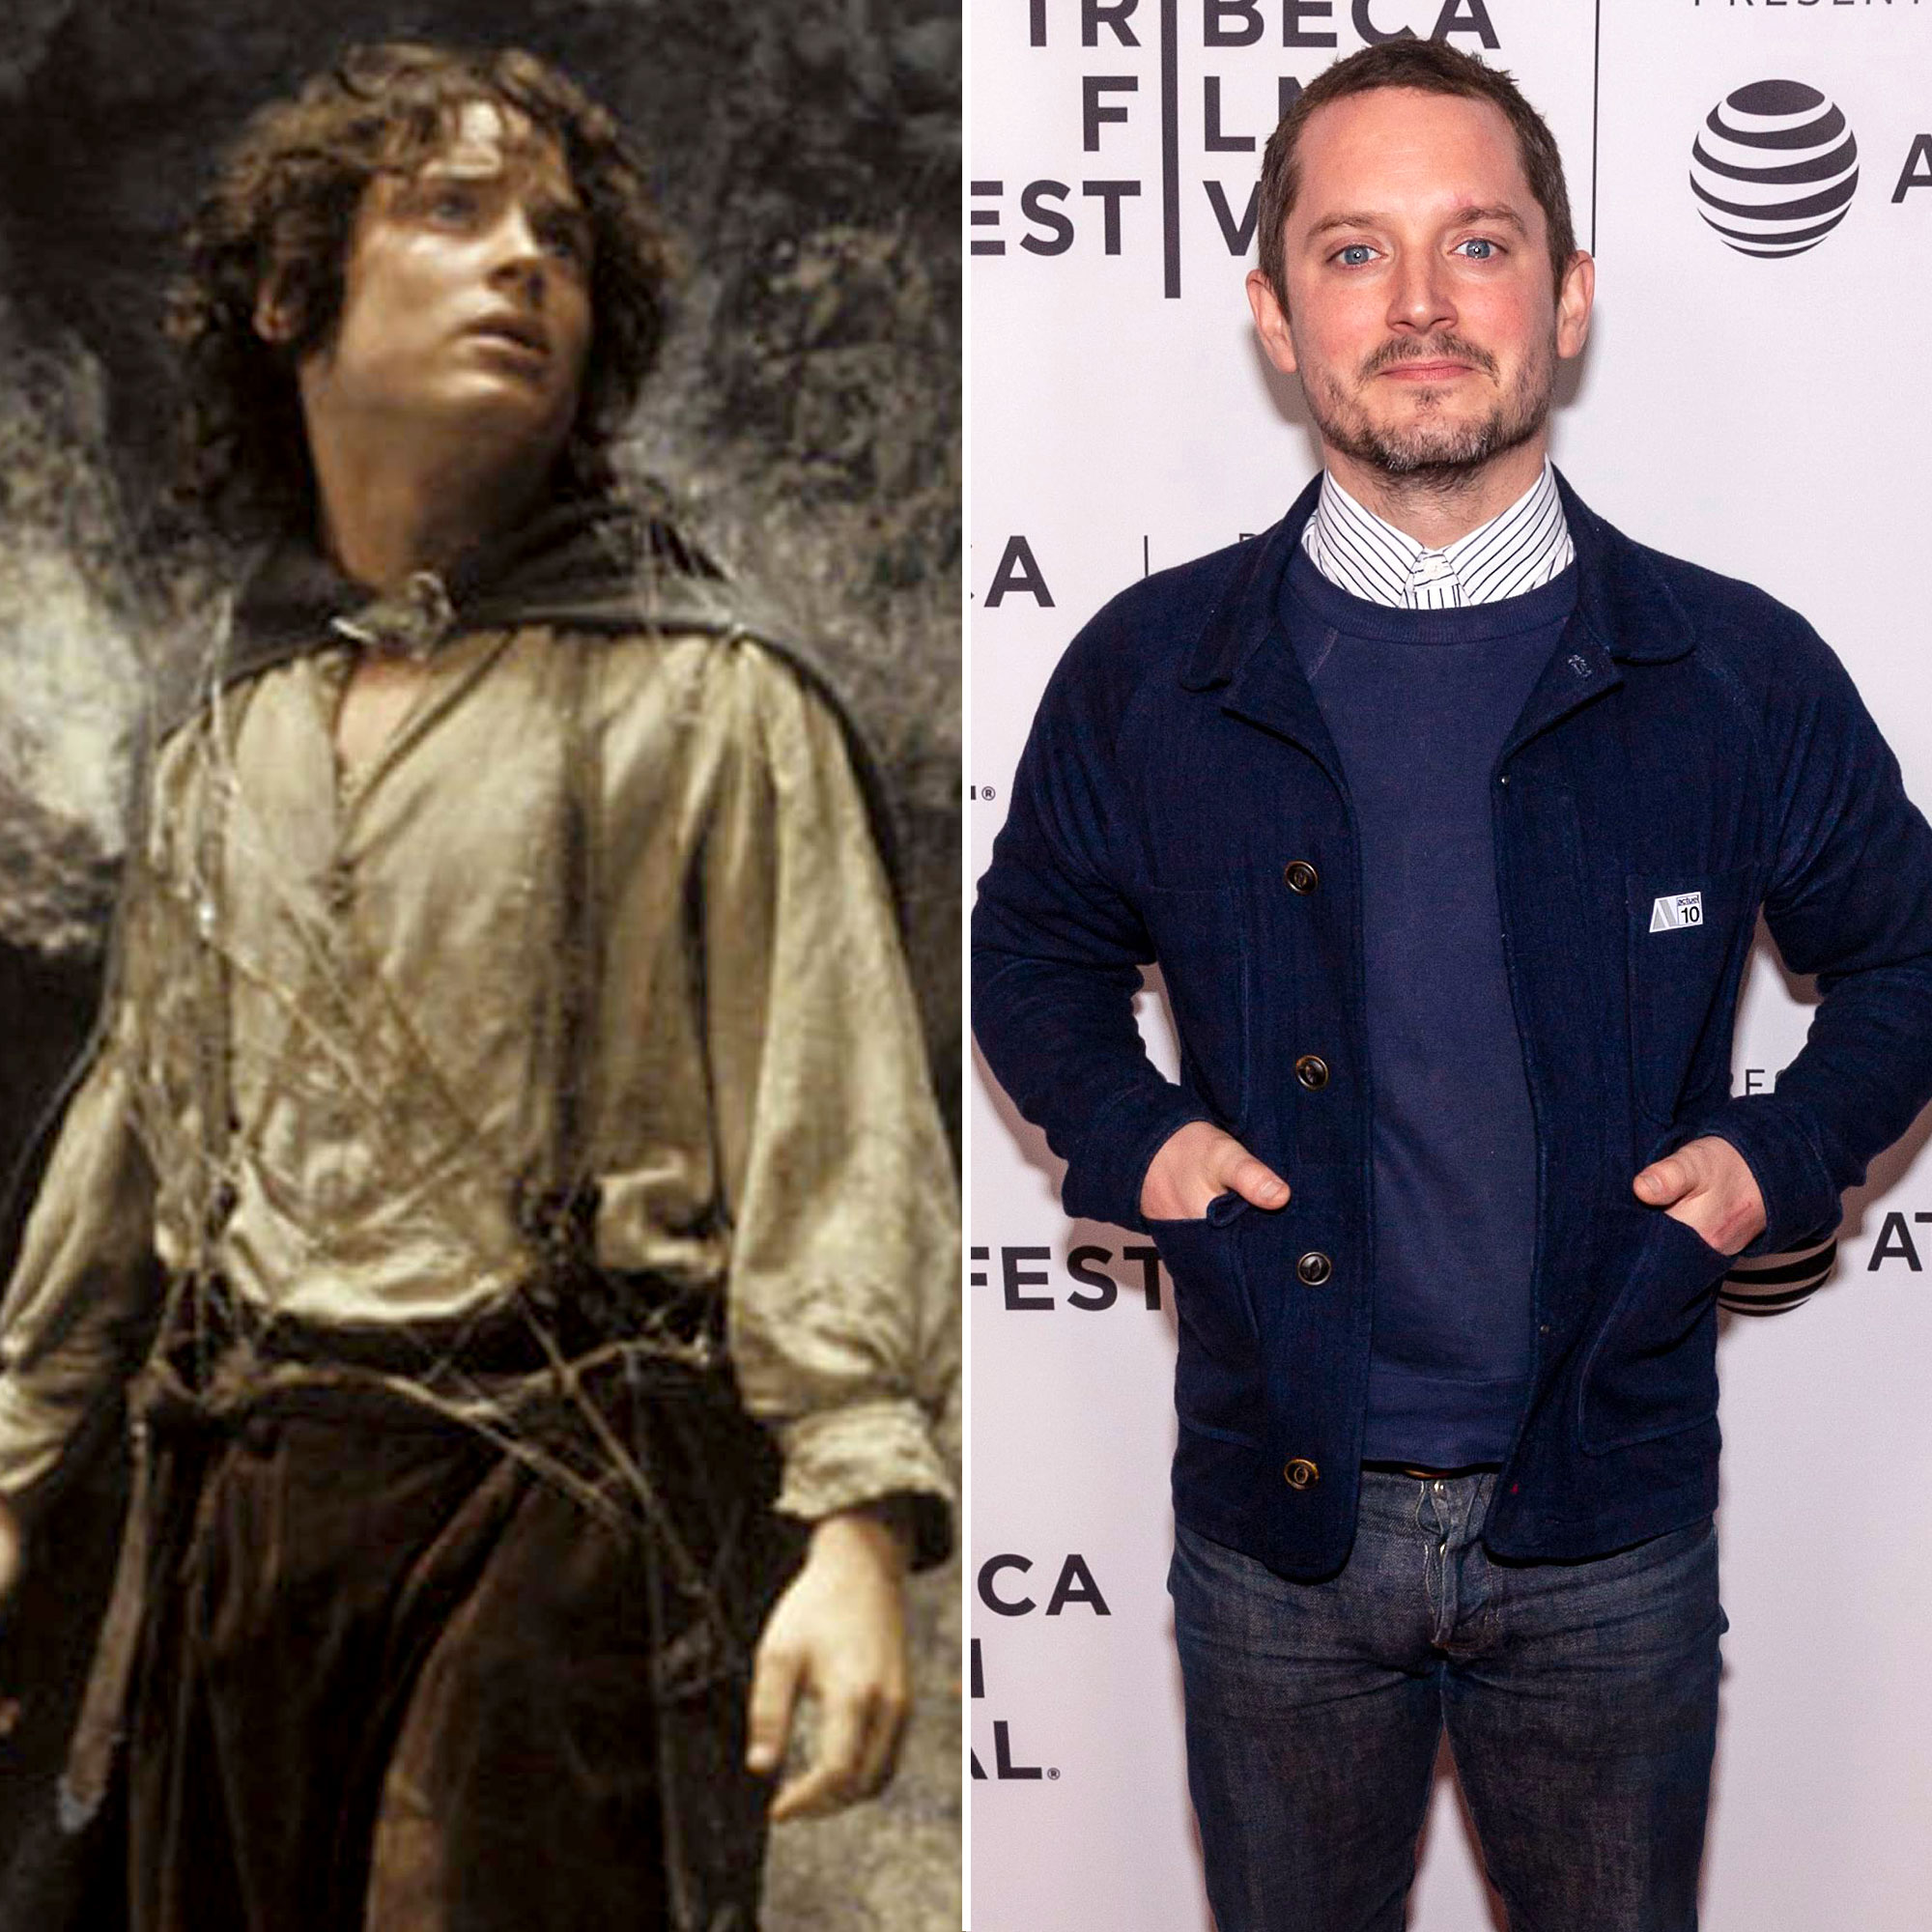 The Lord of the Rings (film series) All Cast: Then and Now ☆ 2020 